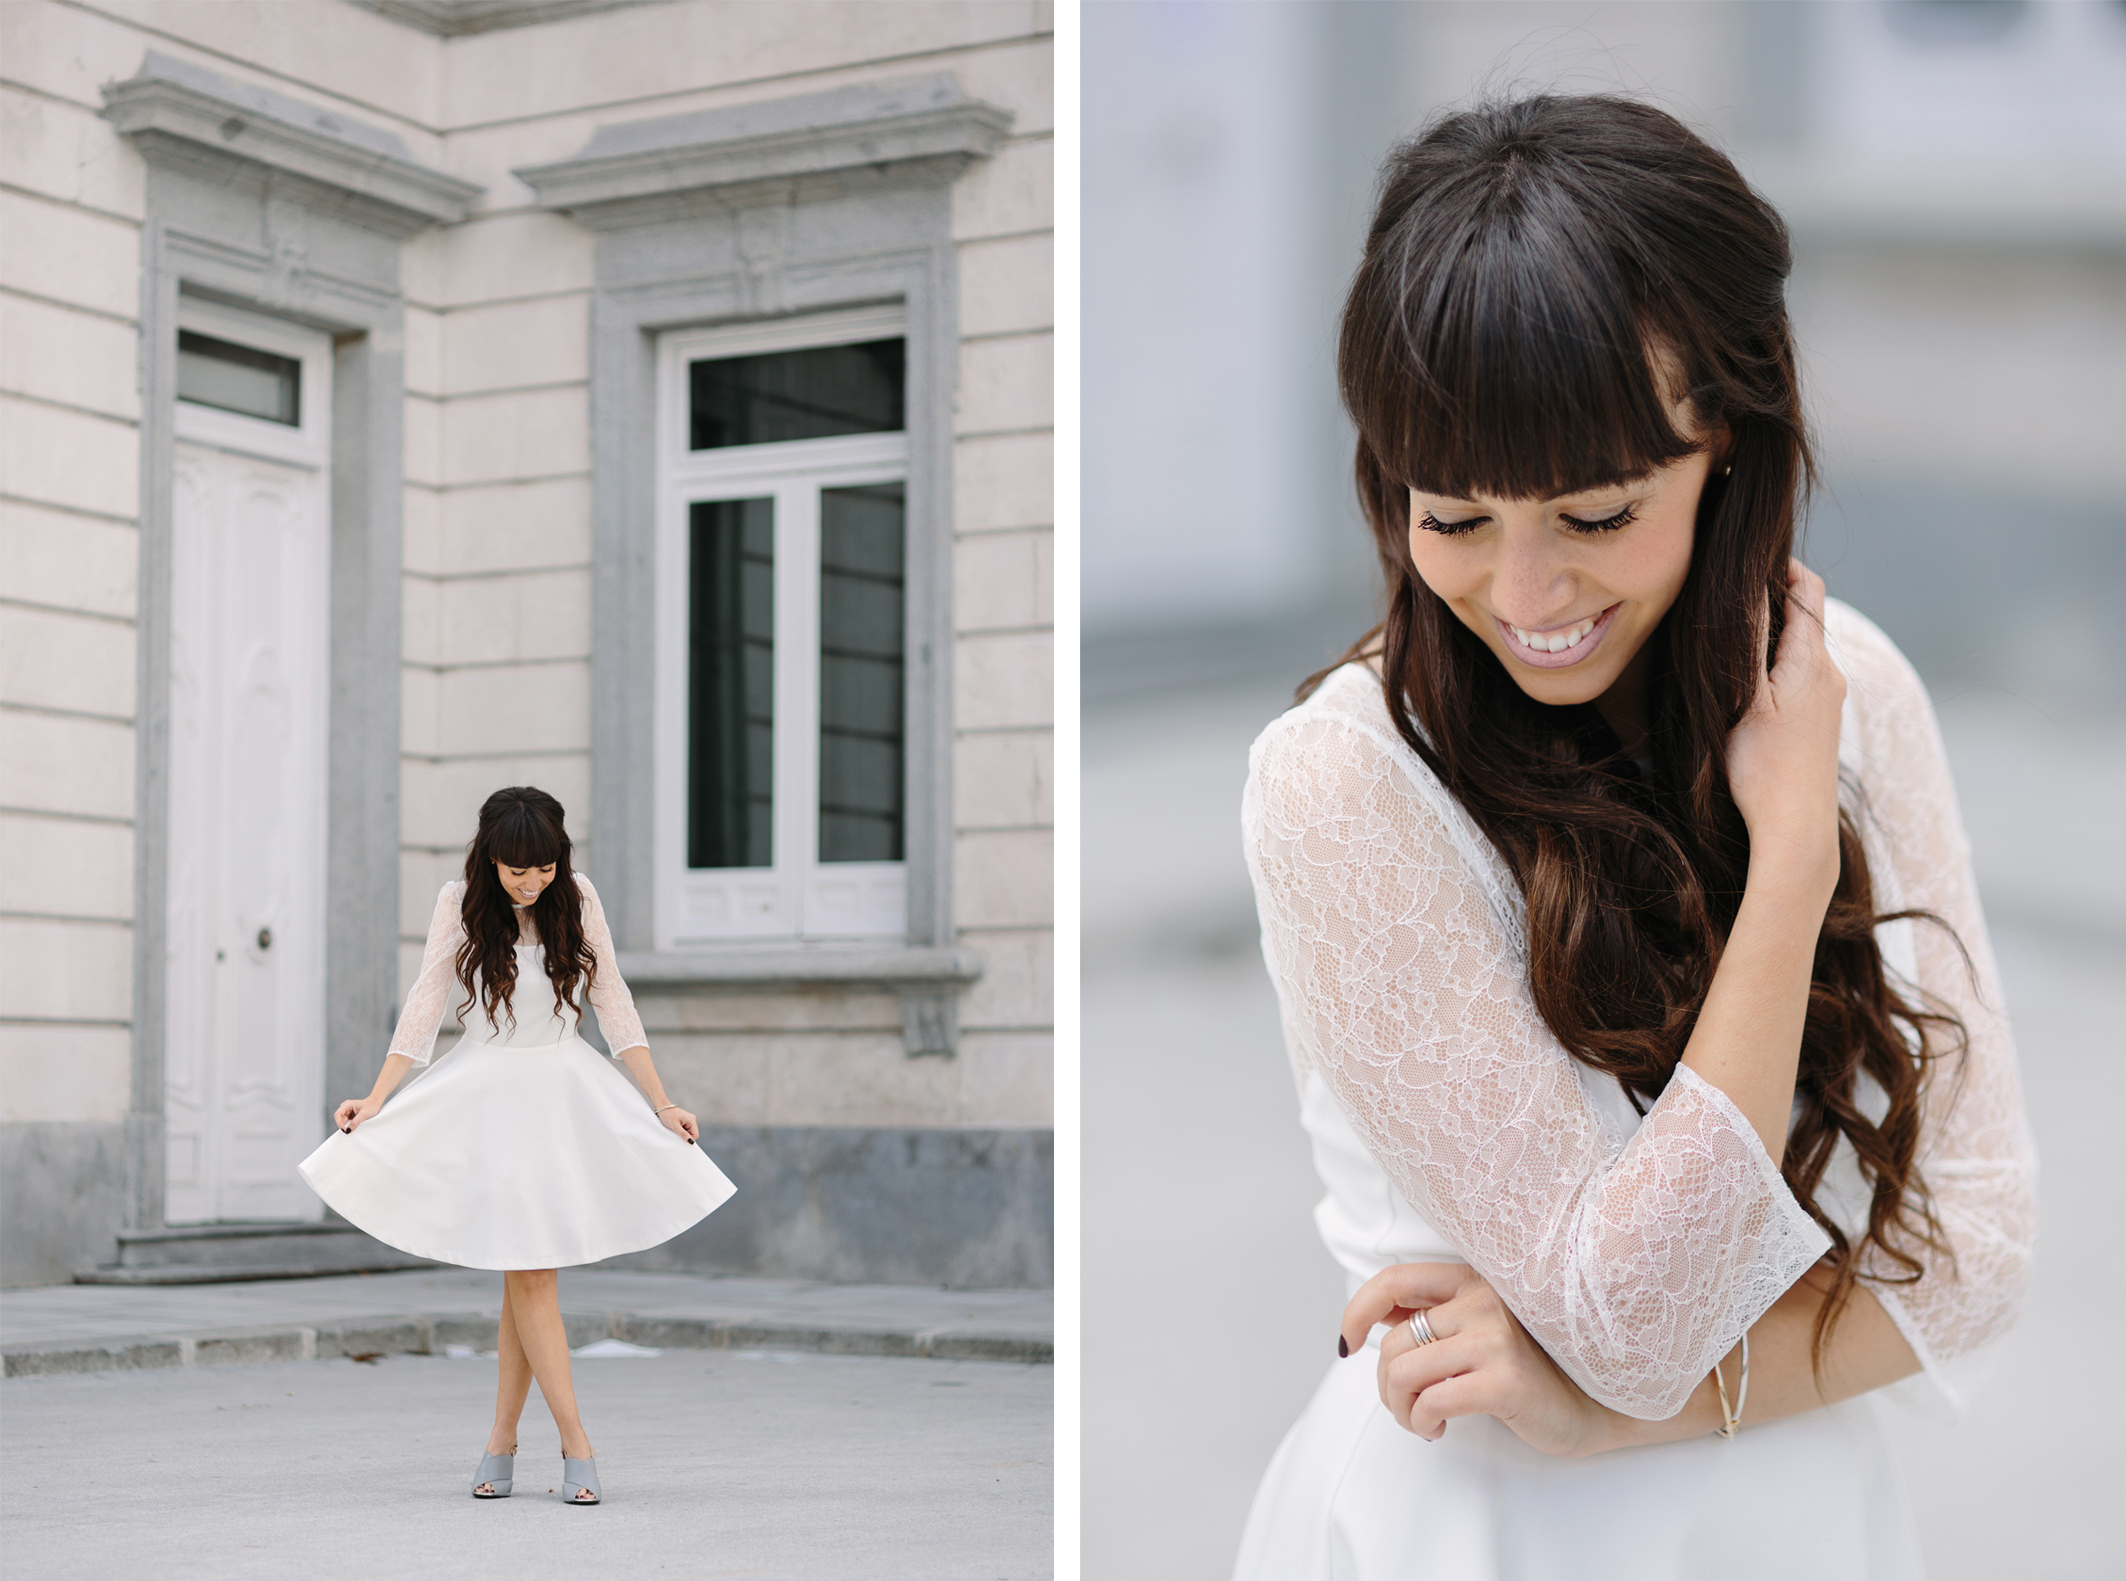 Short white Wedding Dress, street-style, ceremony outfit, la redoute